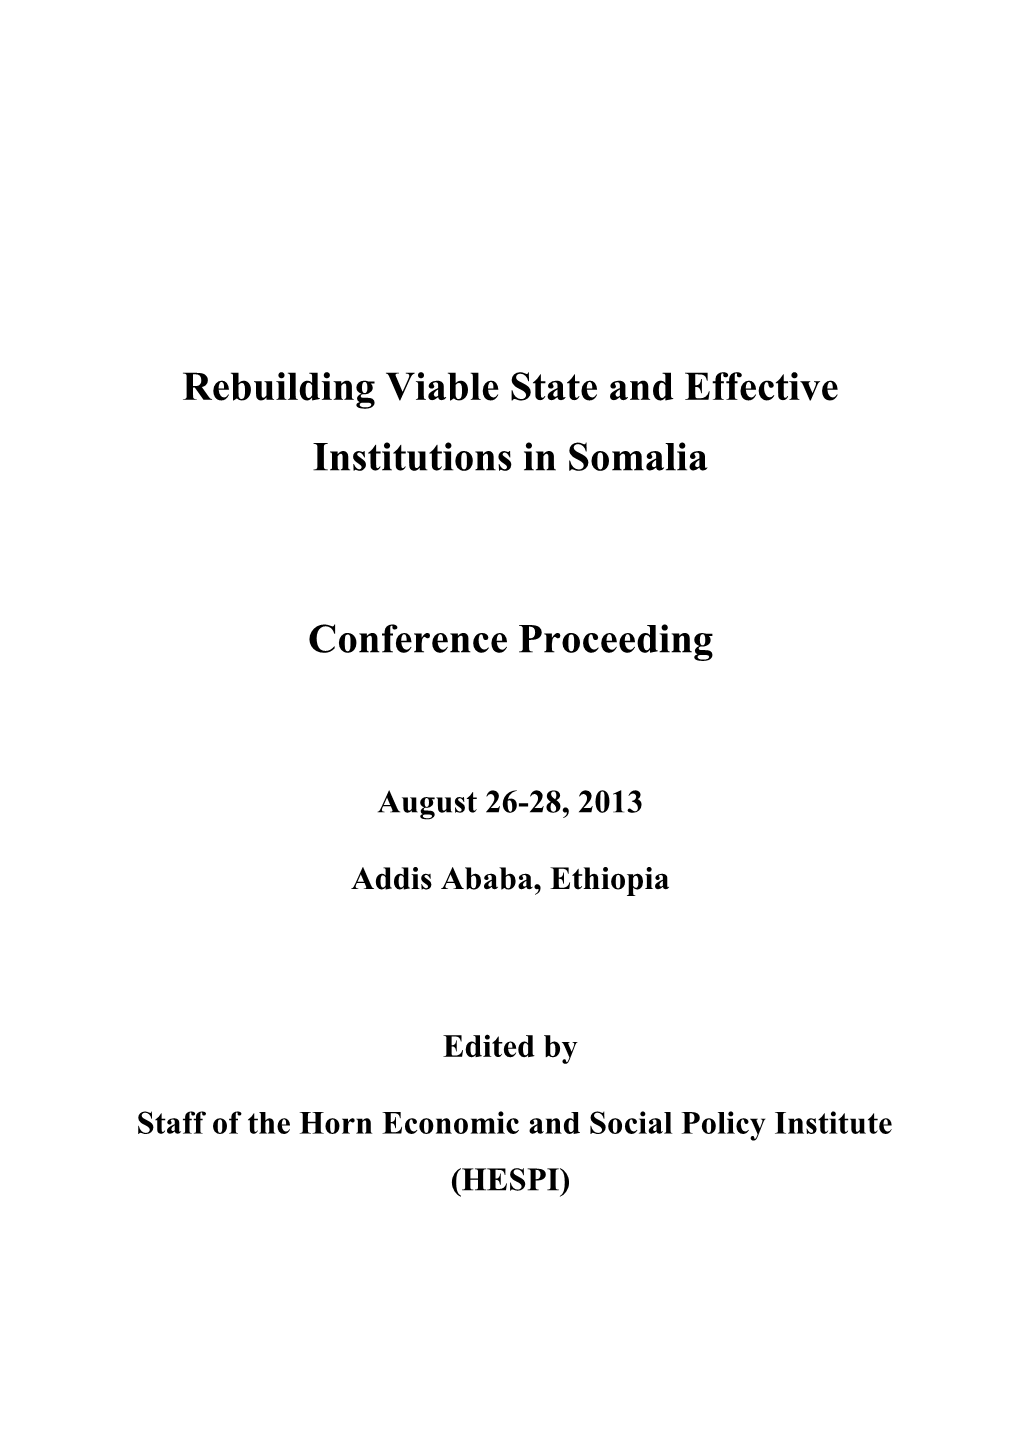 Rebuilding Viable State and Effective Institutions in Somalia Conference